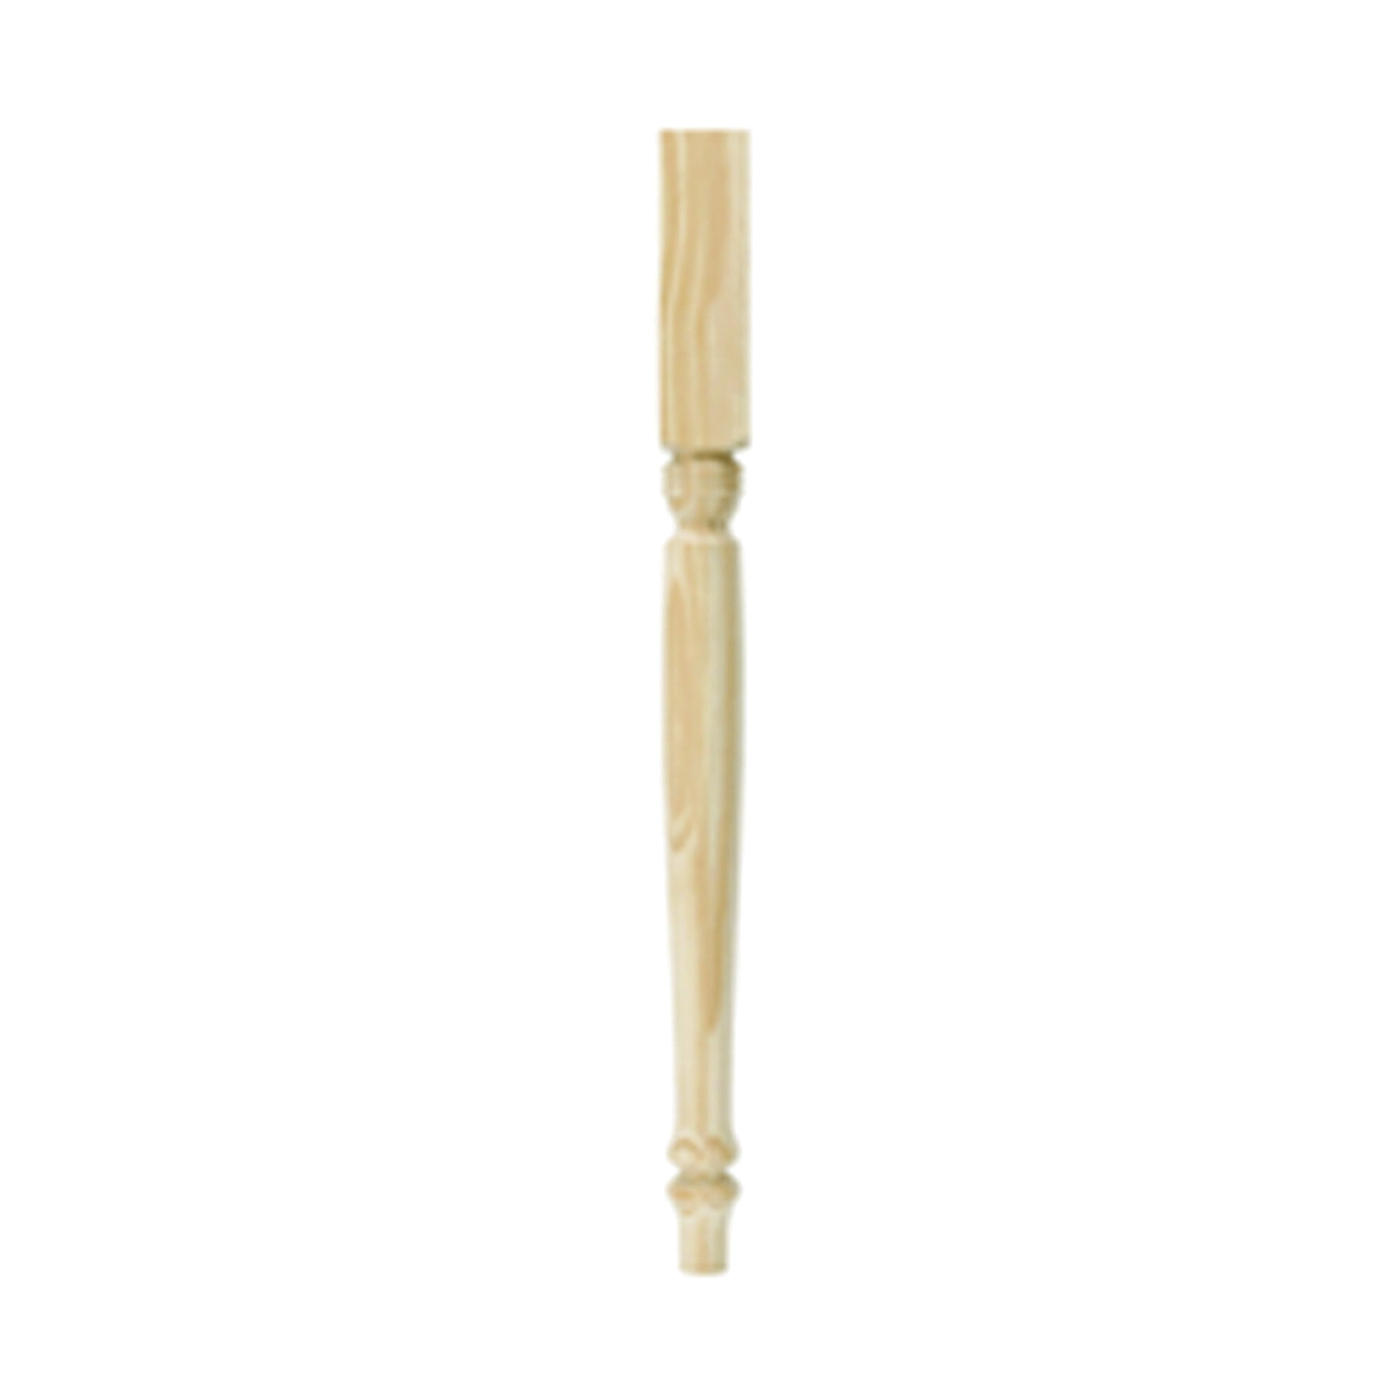 2915 Table Leg, 21-1/4 in H, 2-1/4 in W, Pine Wood, Natural, Smooth Sanded